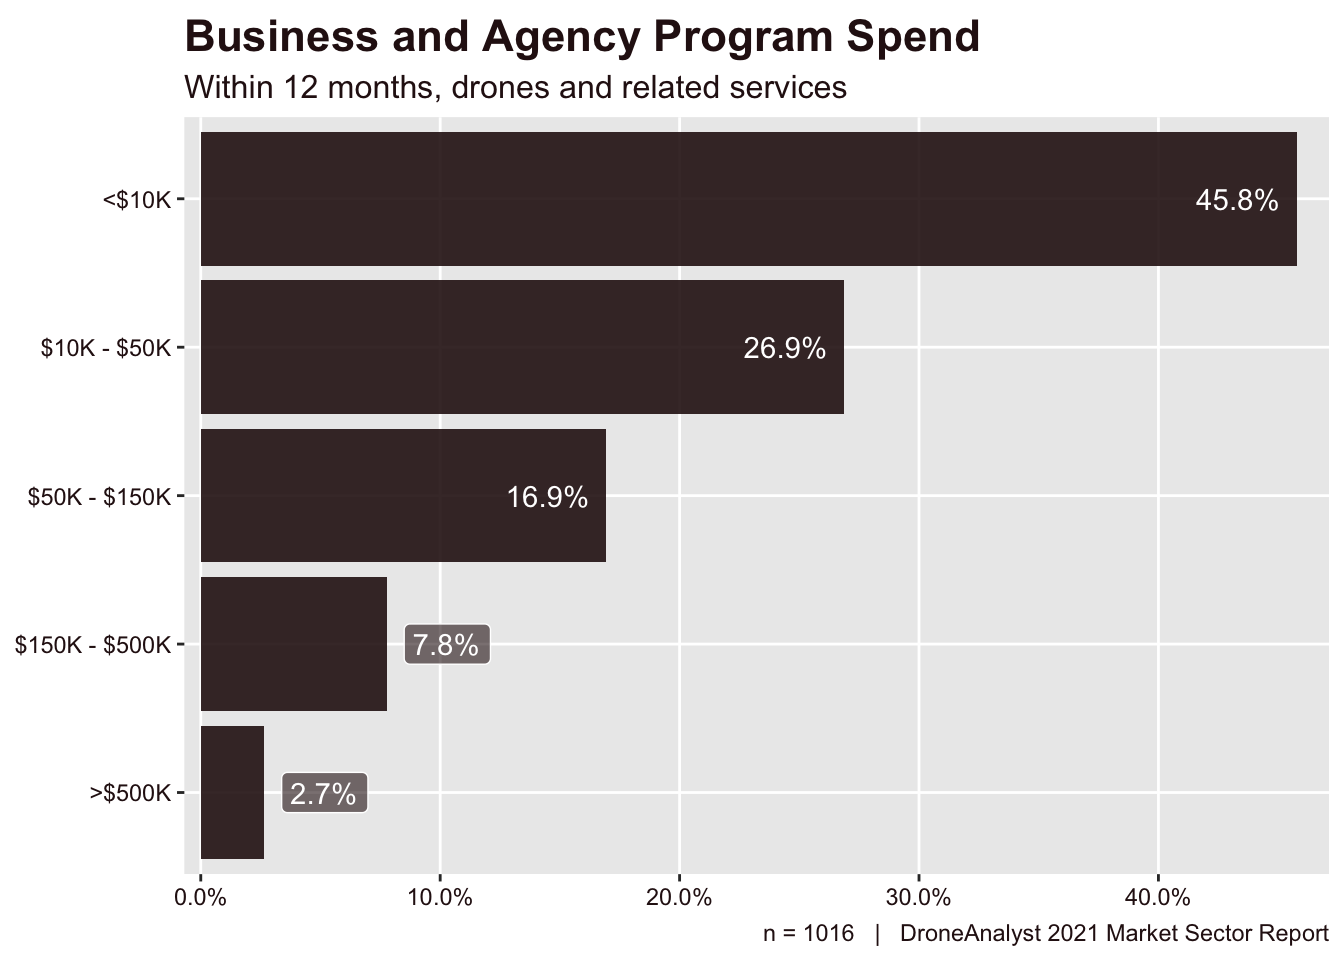 Business and Agency Program Spend